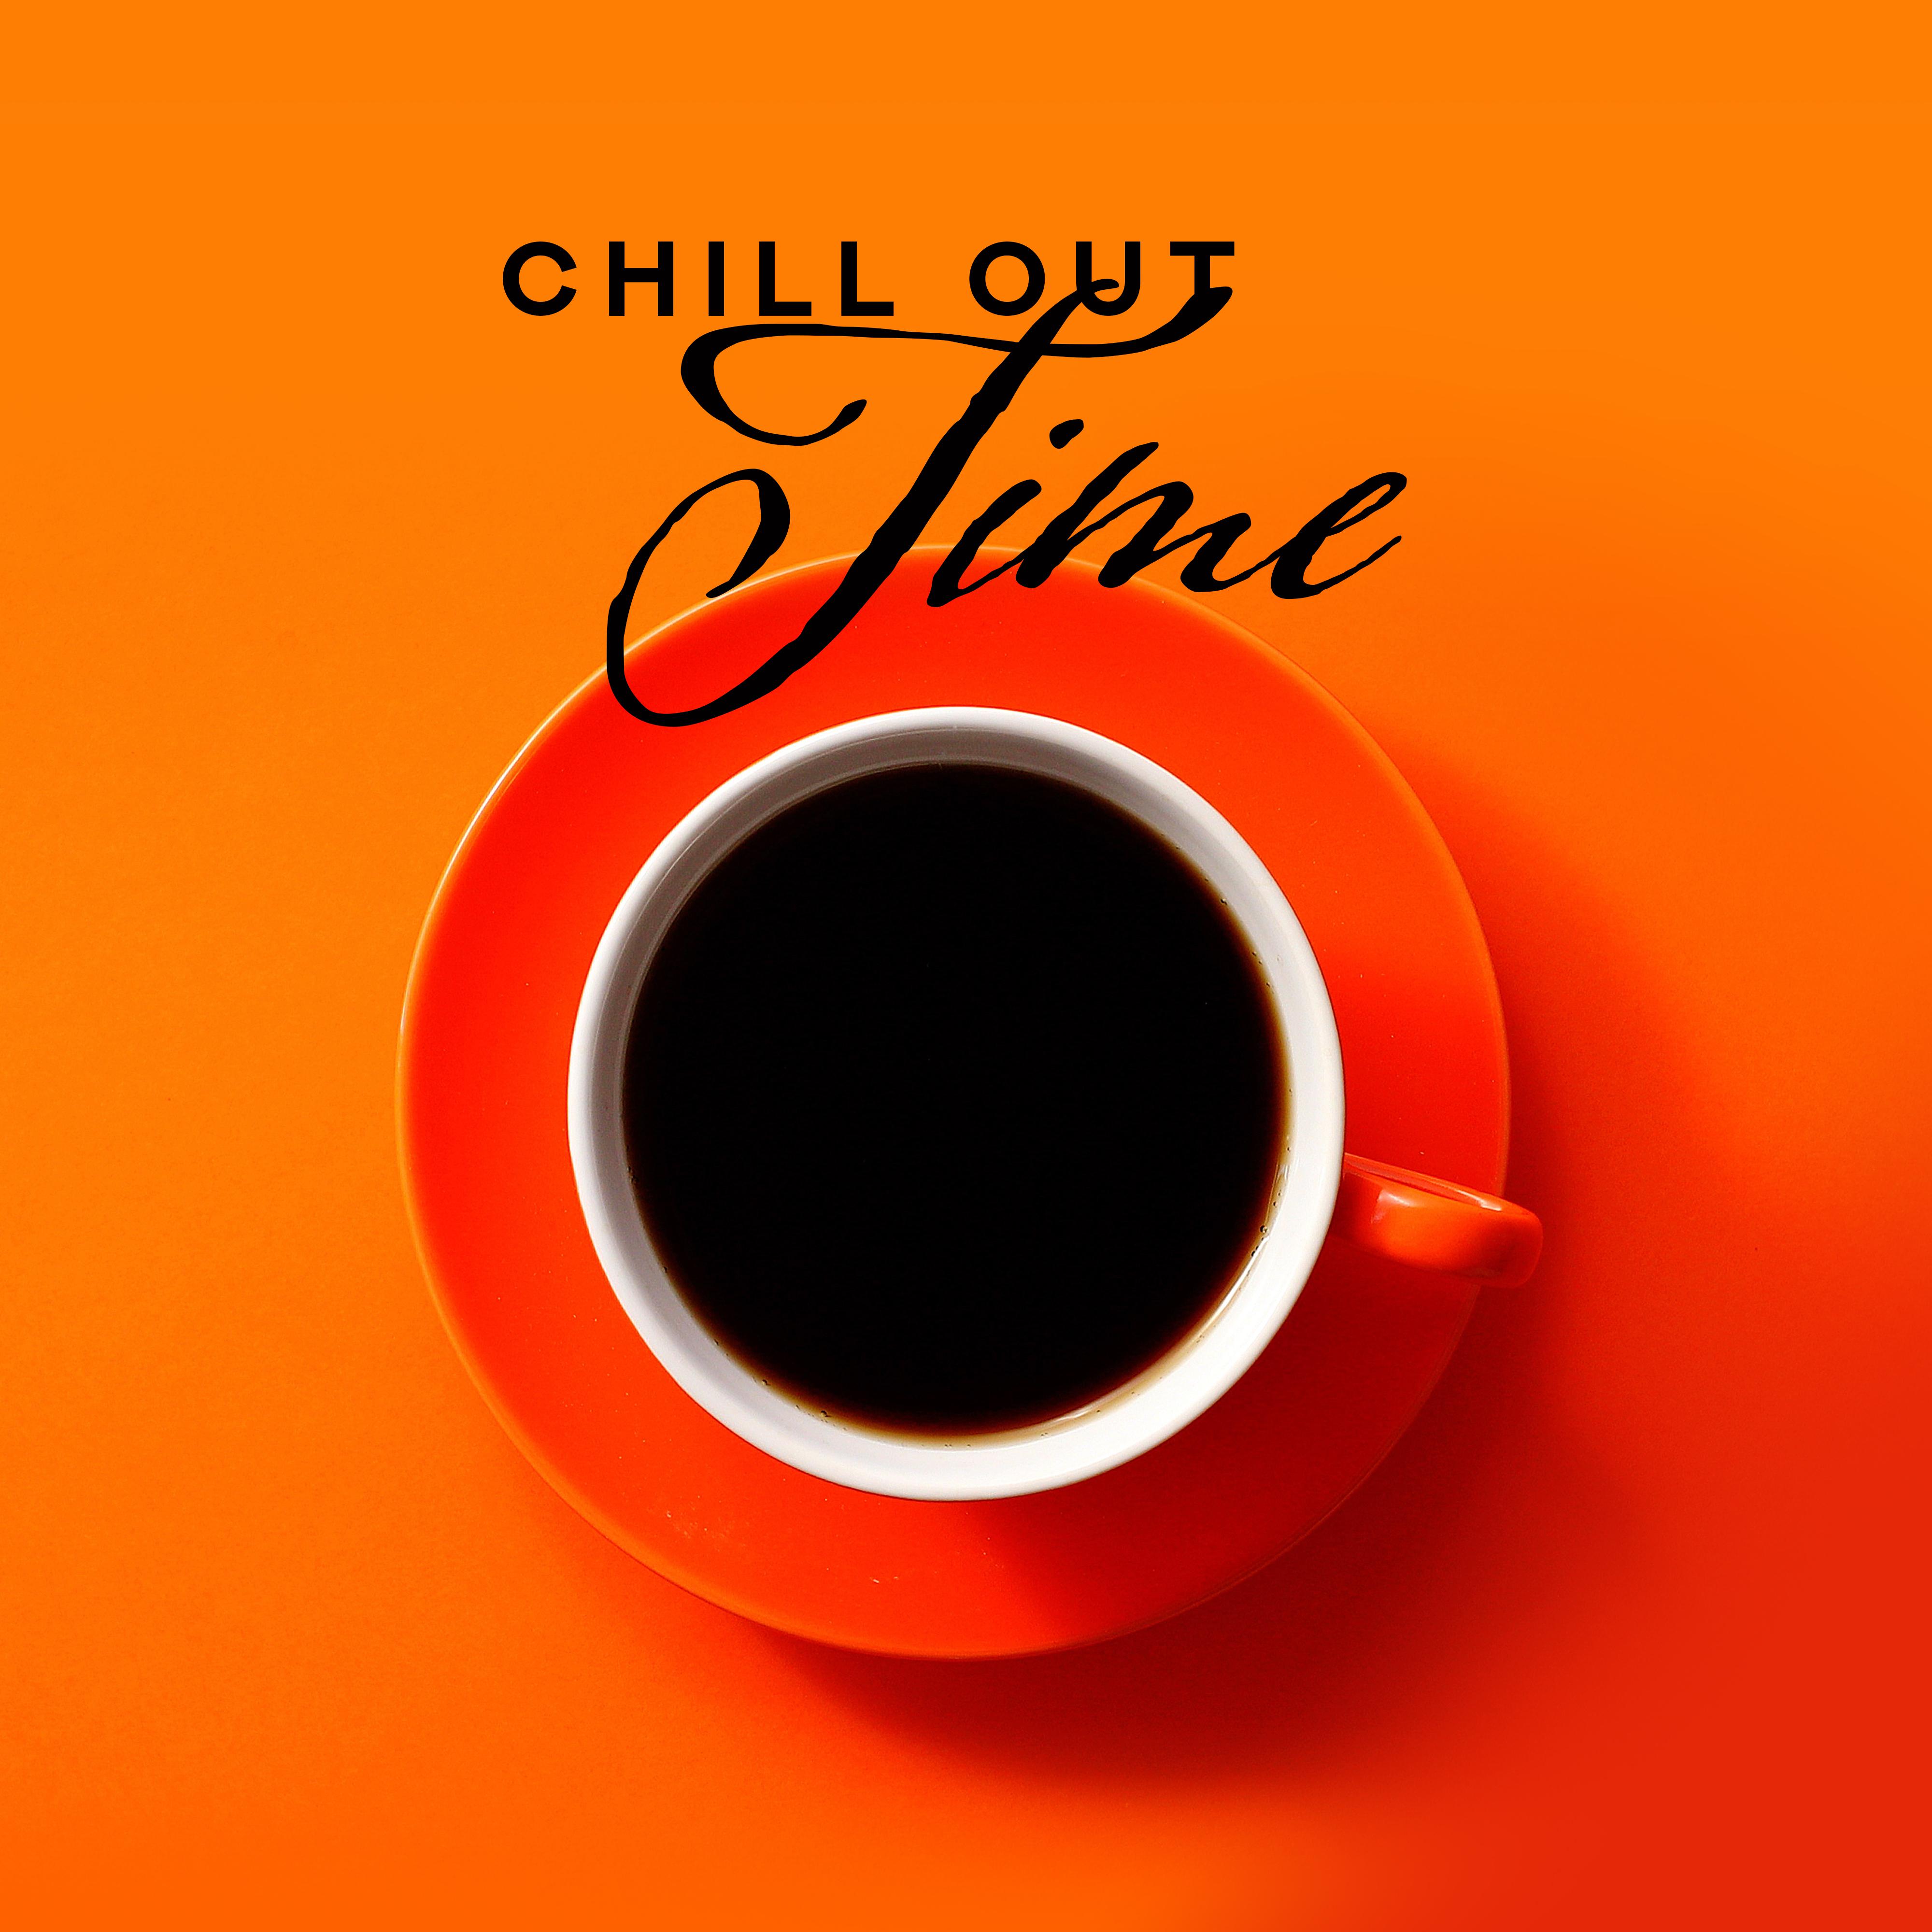 Chill Out Time: Musical Set for a Blissful Moments of Relaxation, Unwind and Rest